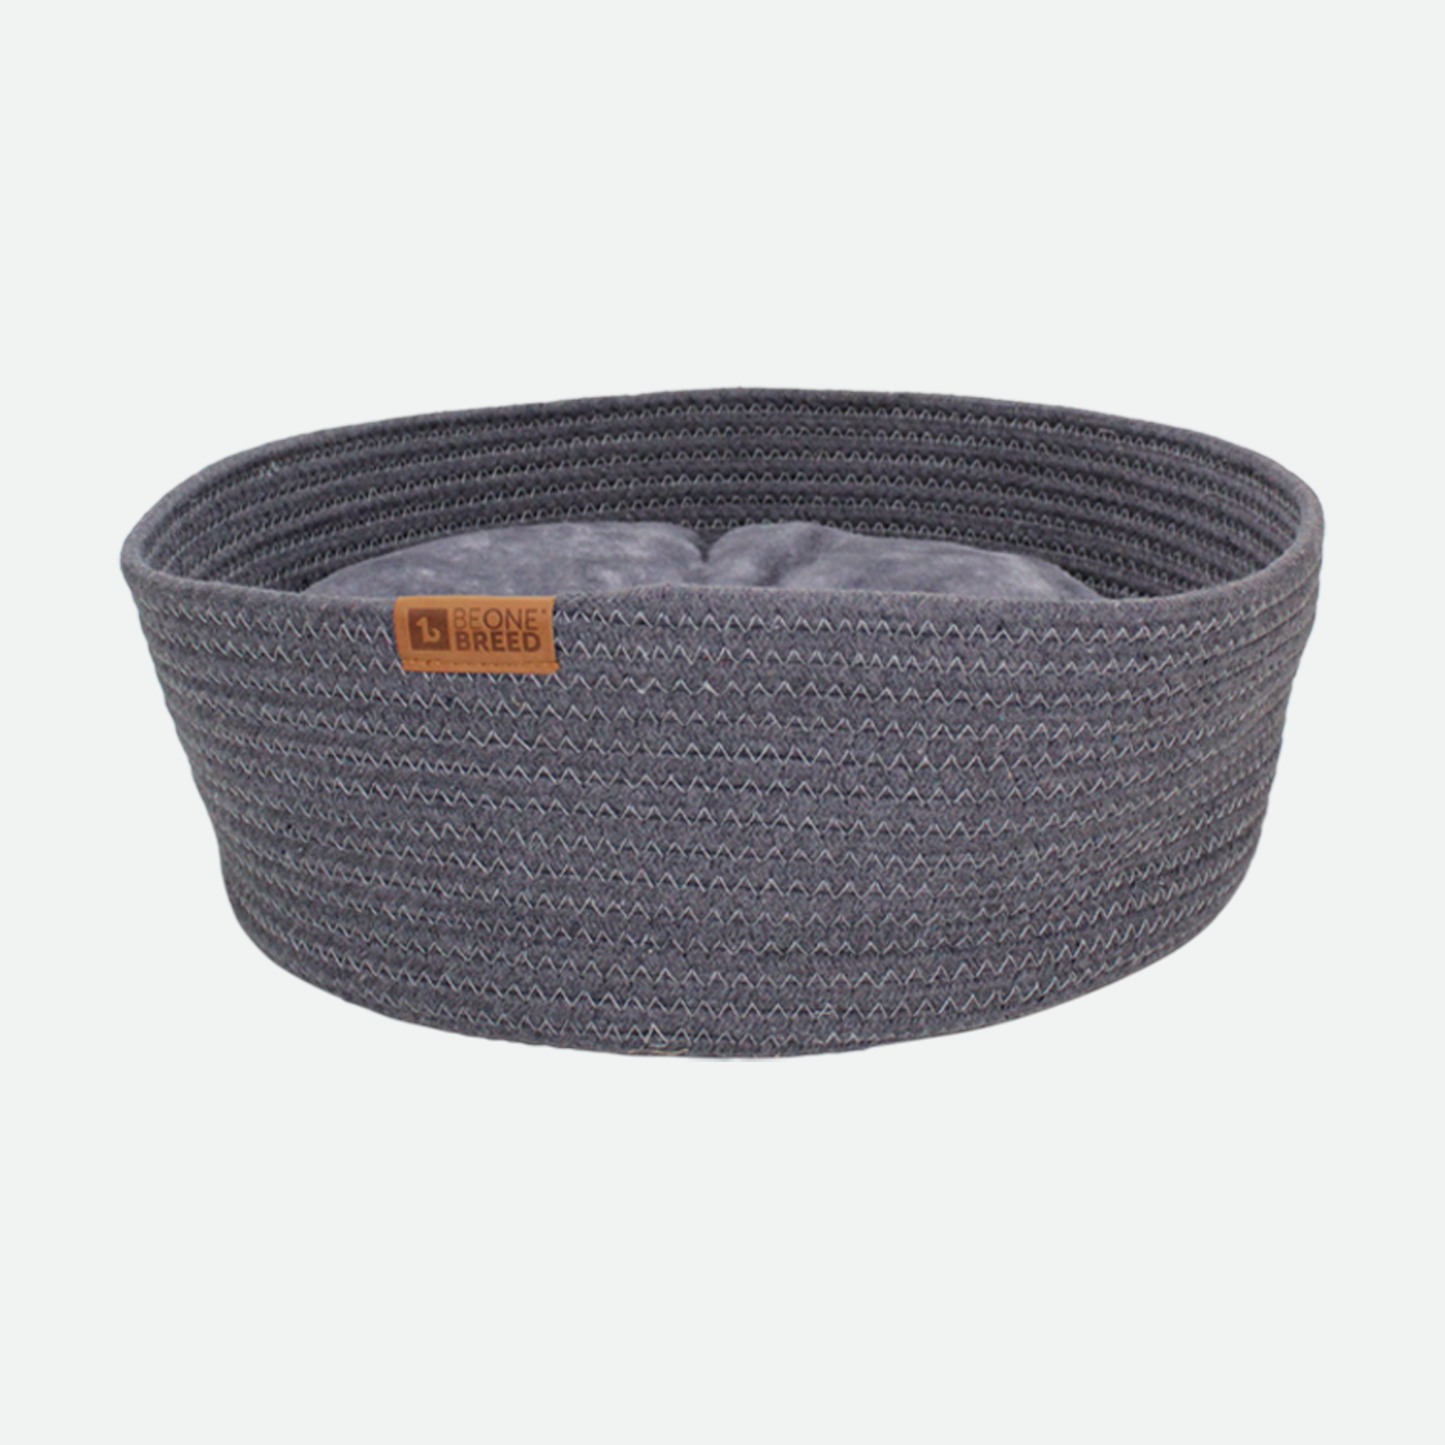 Woven basket bed for cat, gray